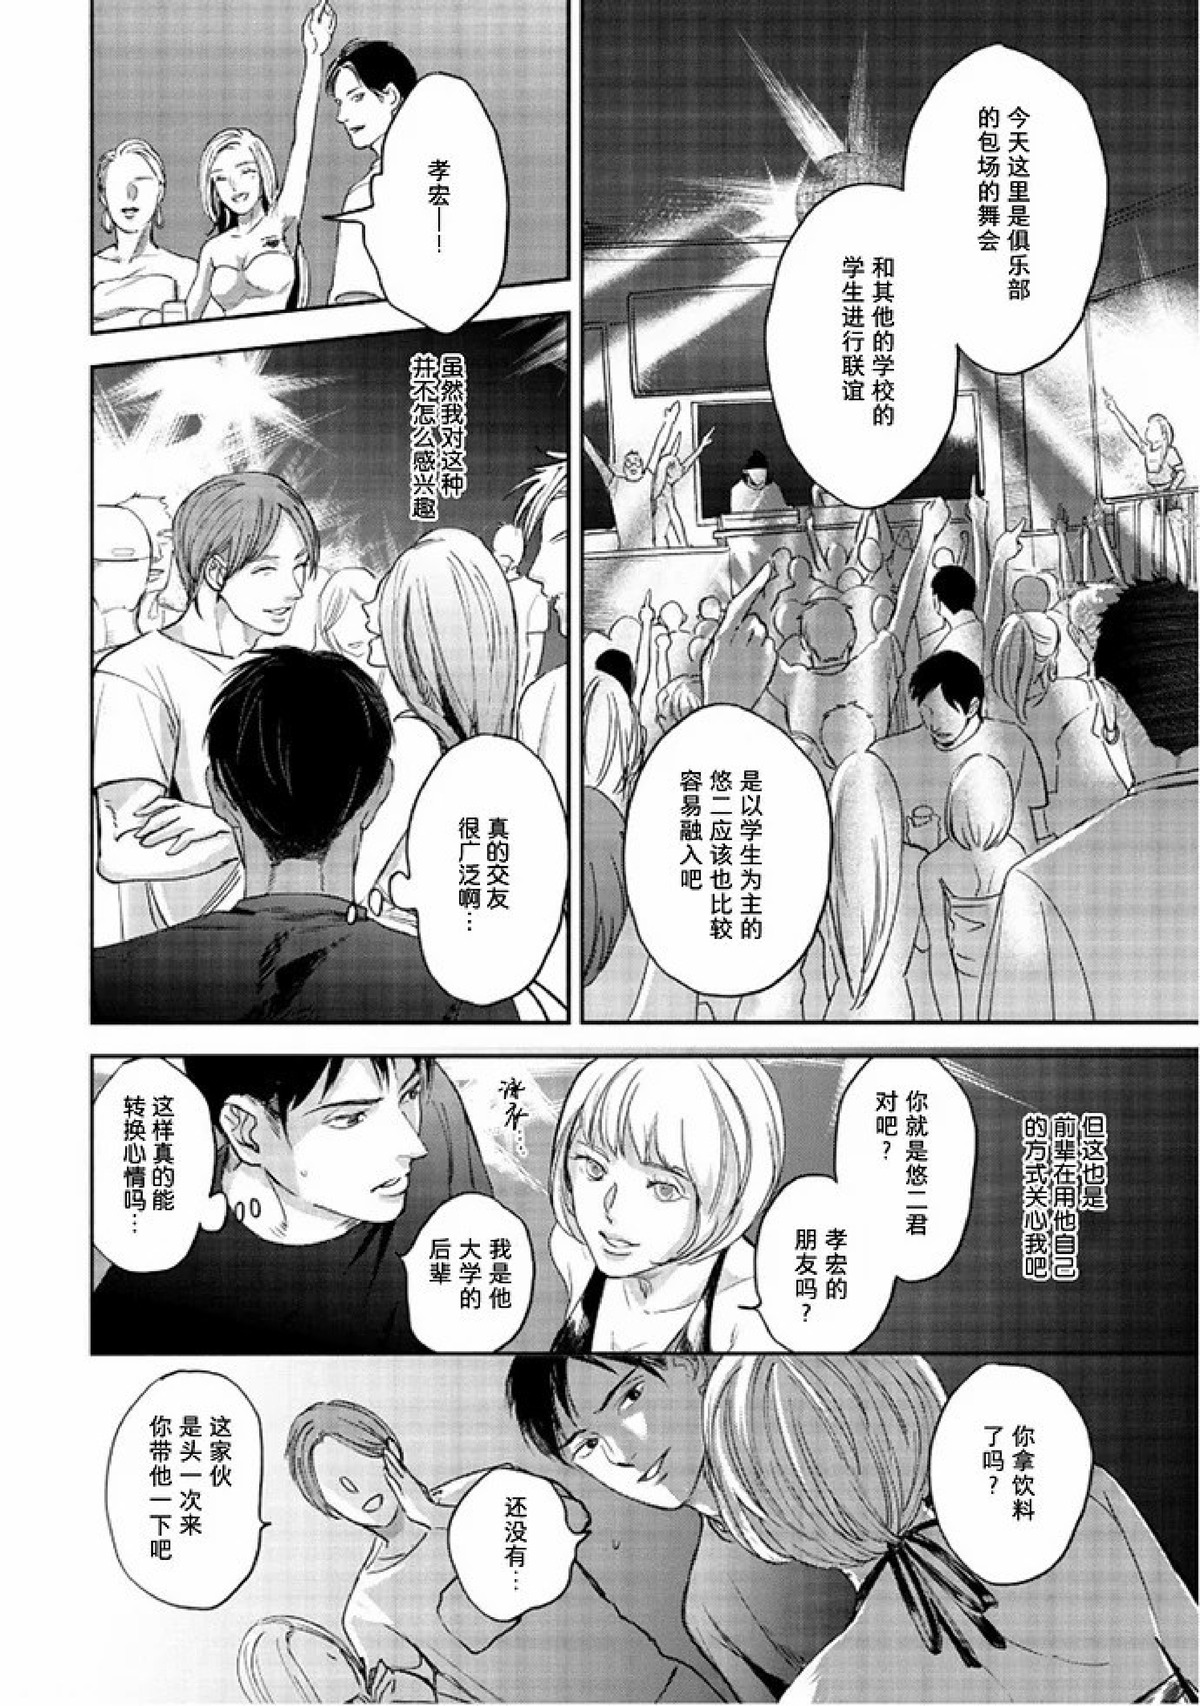 【Two sides of the same coin[耽美]】漫画-（上卷01-02）章节漫画下拉式图片-42.jpg